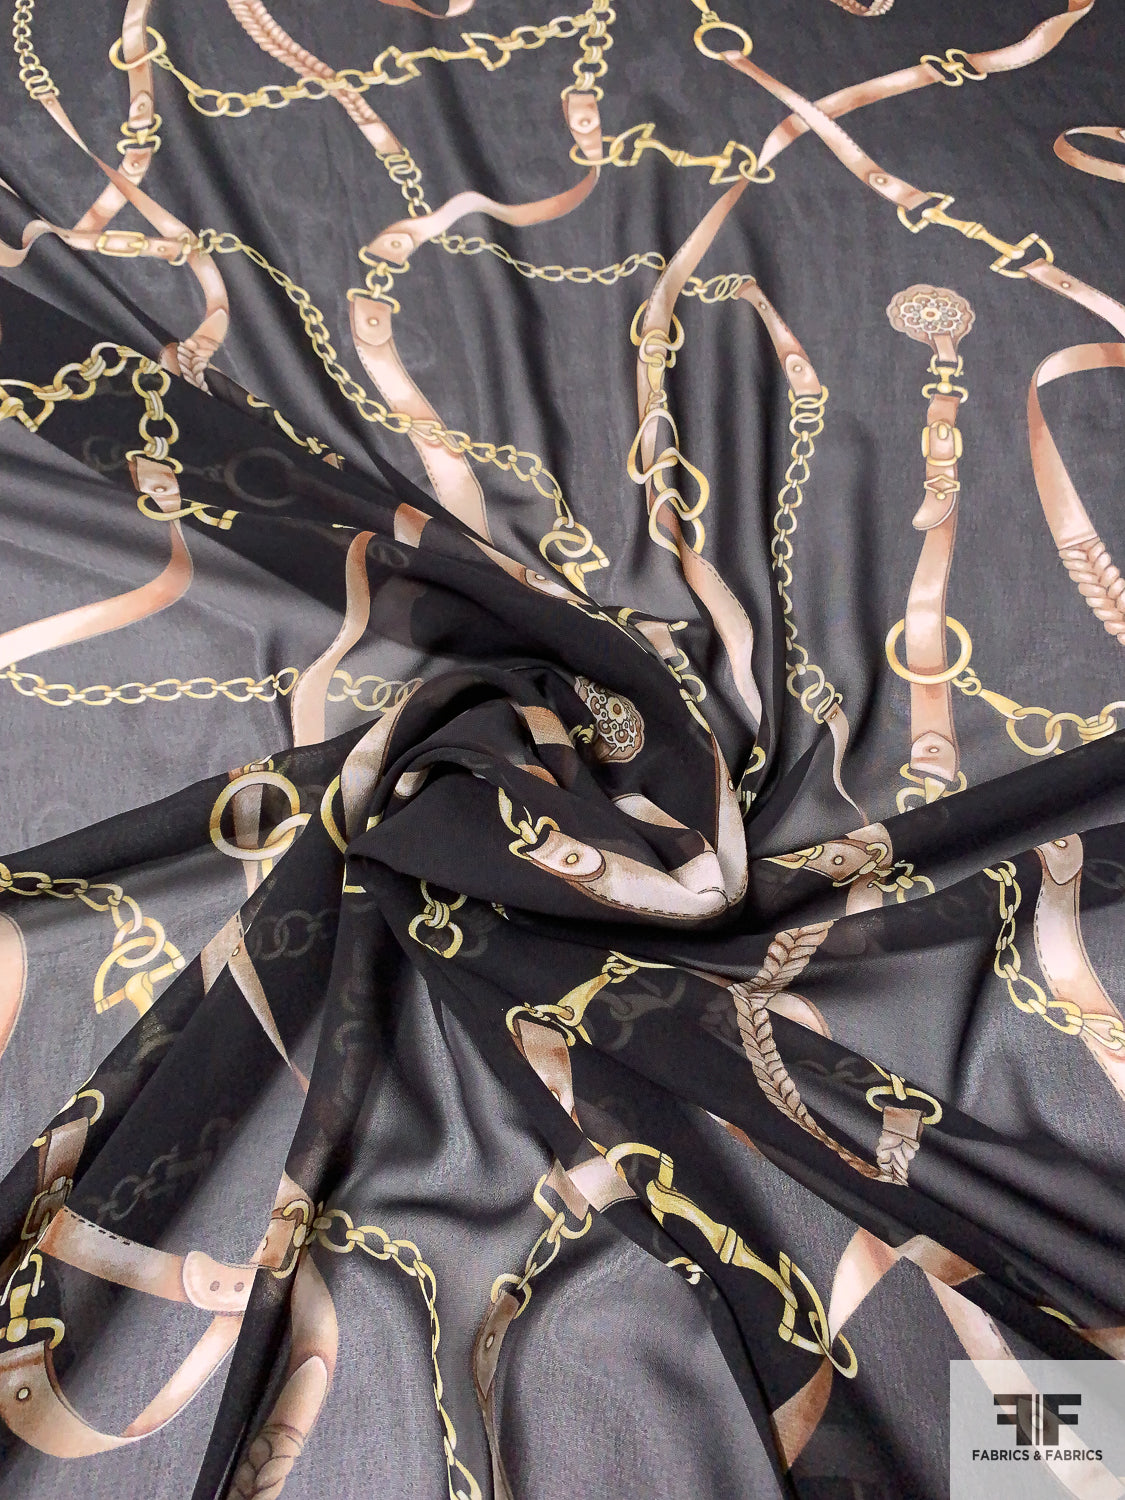 Belted Chains Printed Polyester Chiffon - Black / Gold / Tan